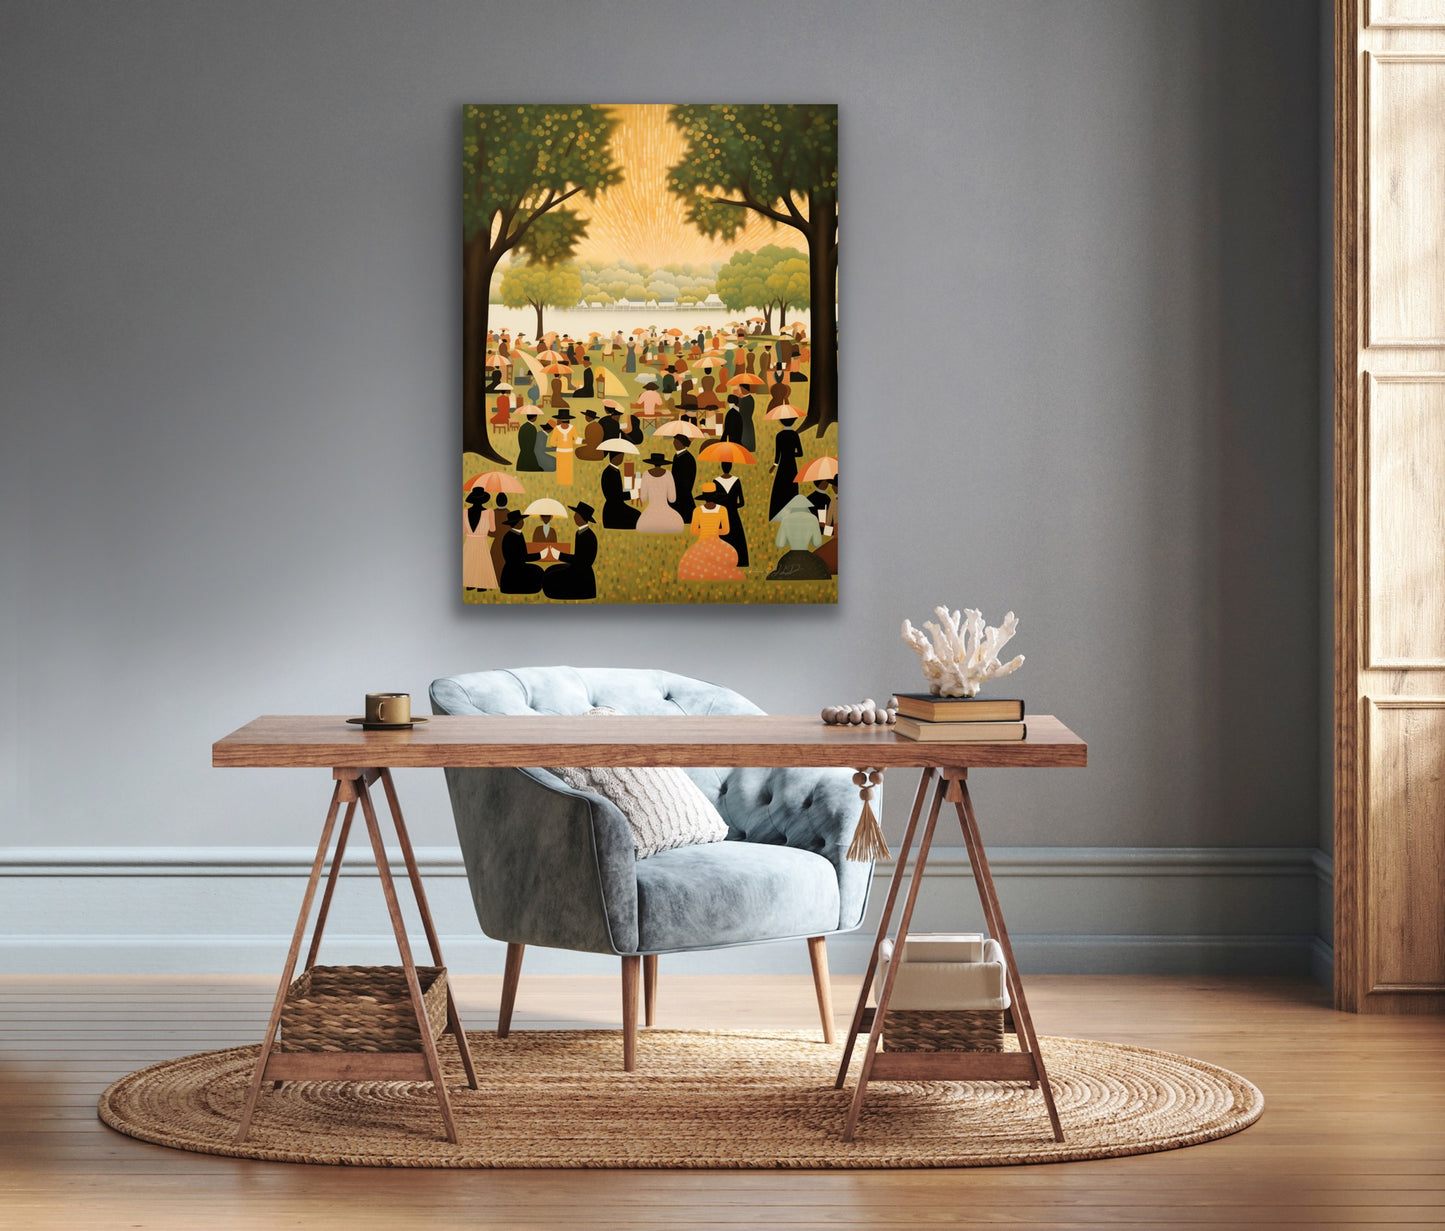 Family Reunion | Stretched Canvas Print Wall Art | Black Art | African American Art